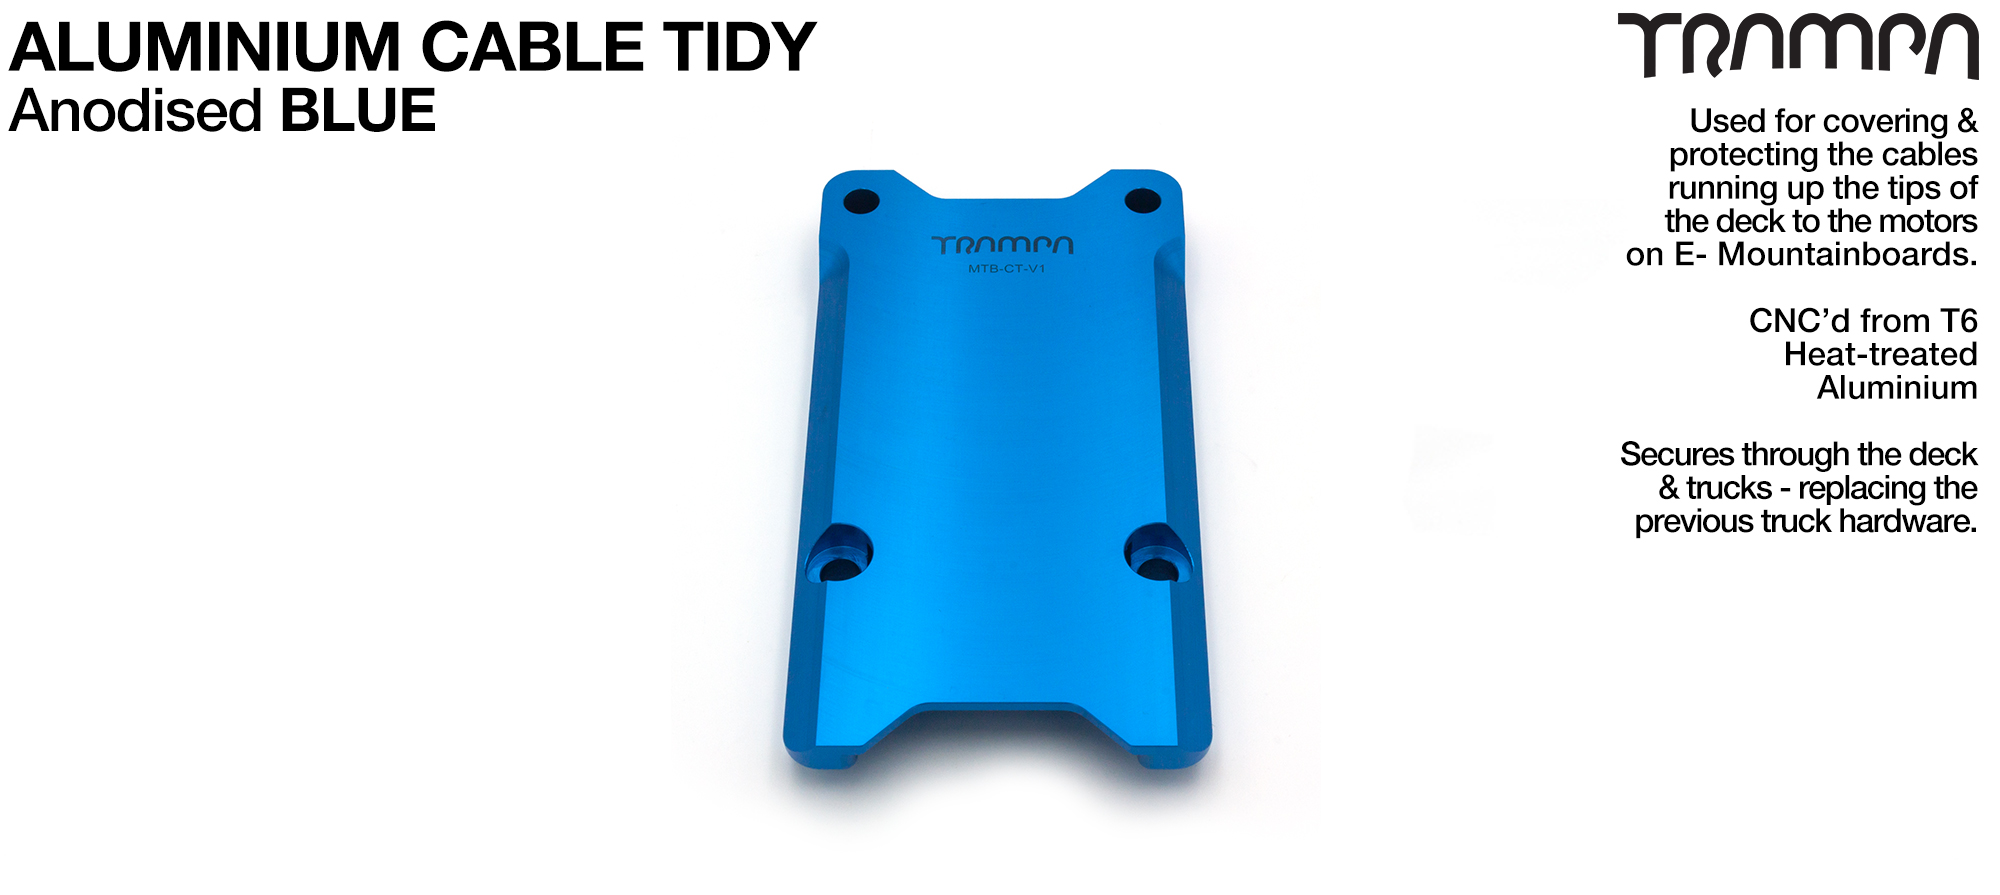 Anodised Aluminum Cable Tidy - BLUE V1